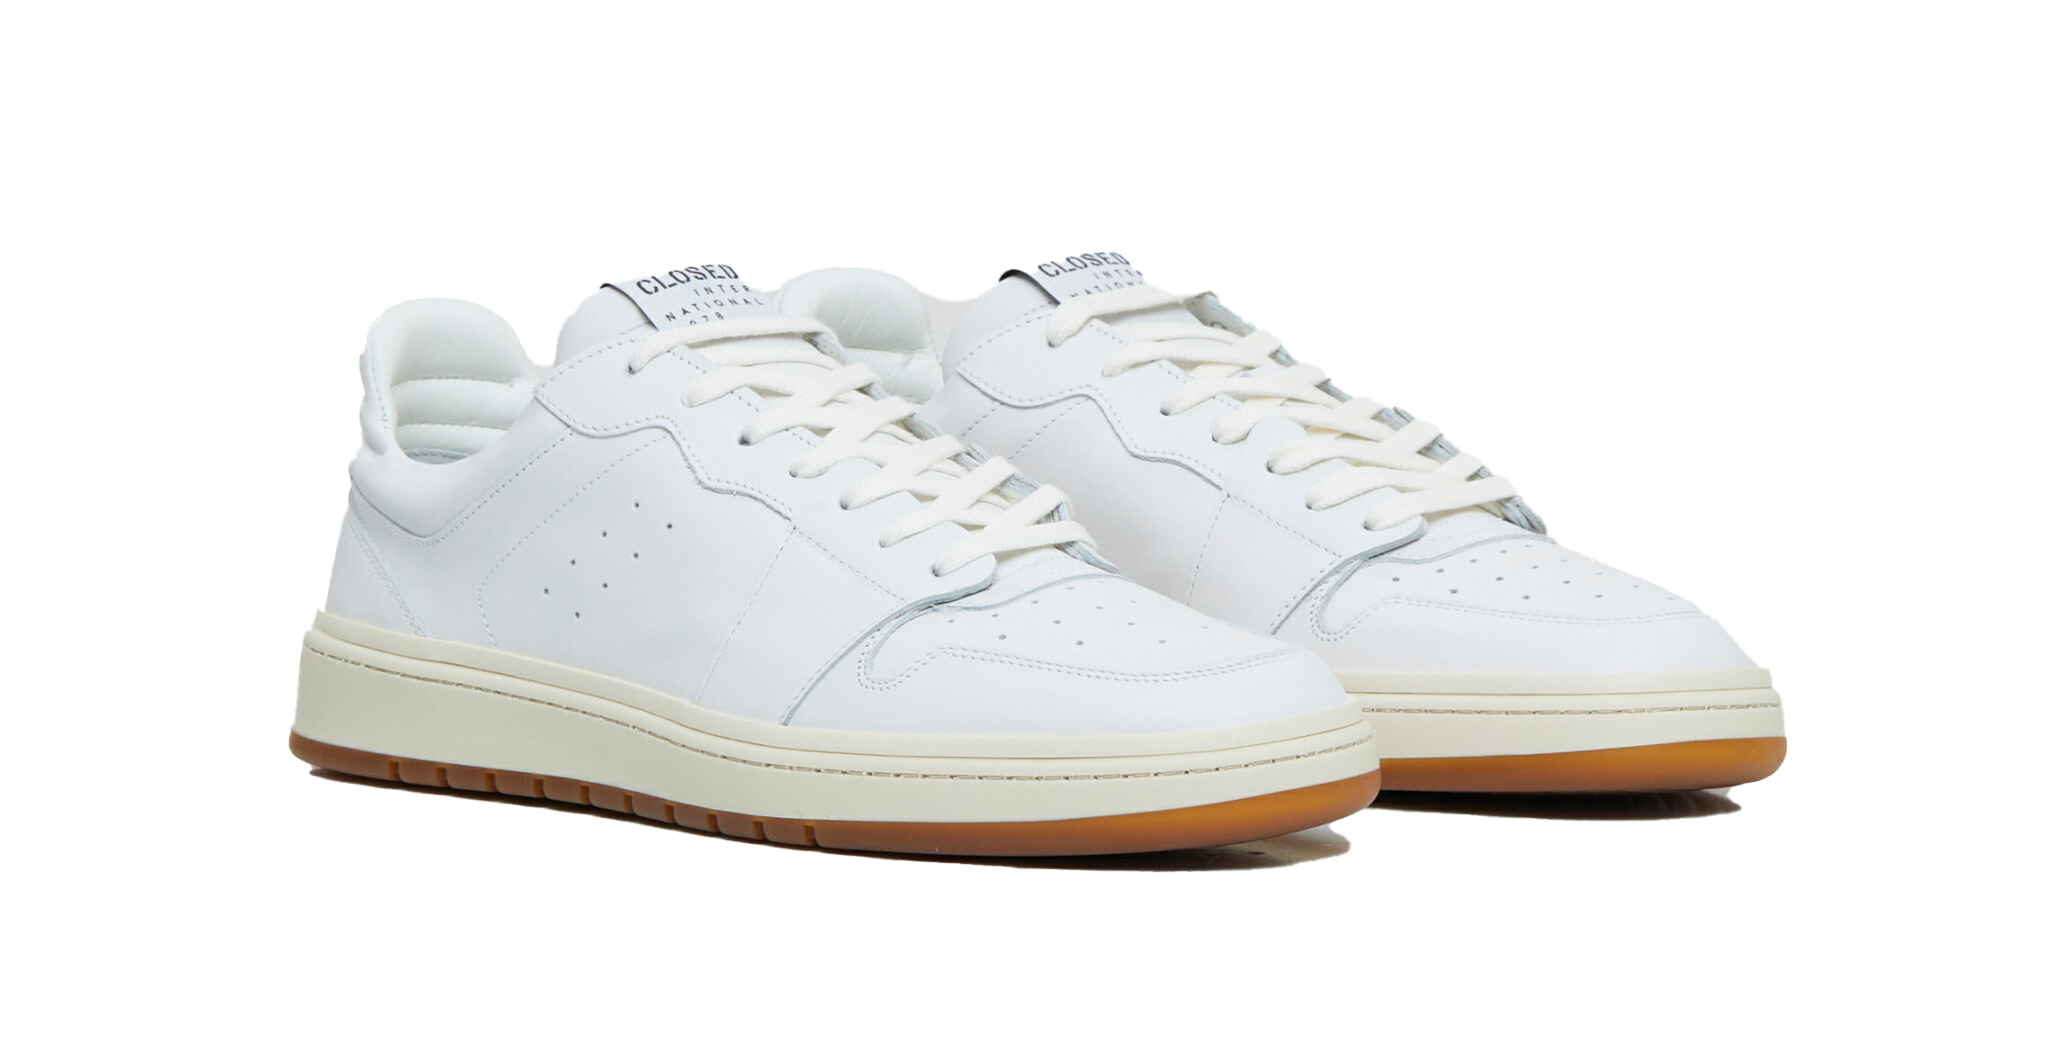 Closed - Nappa Leather Sneakers